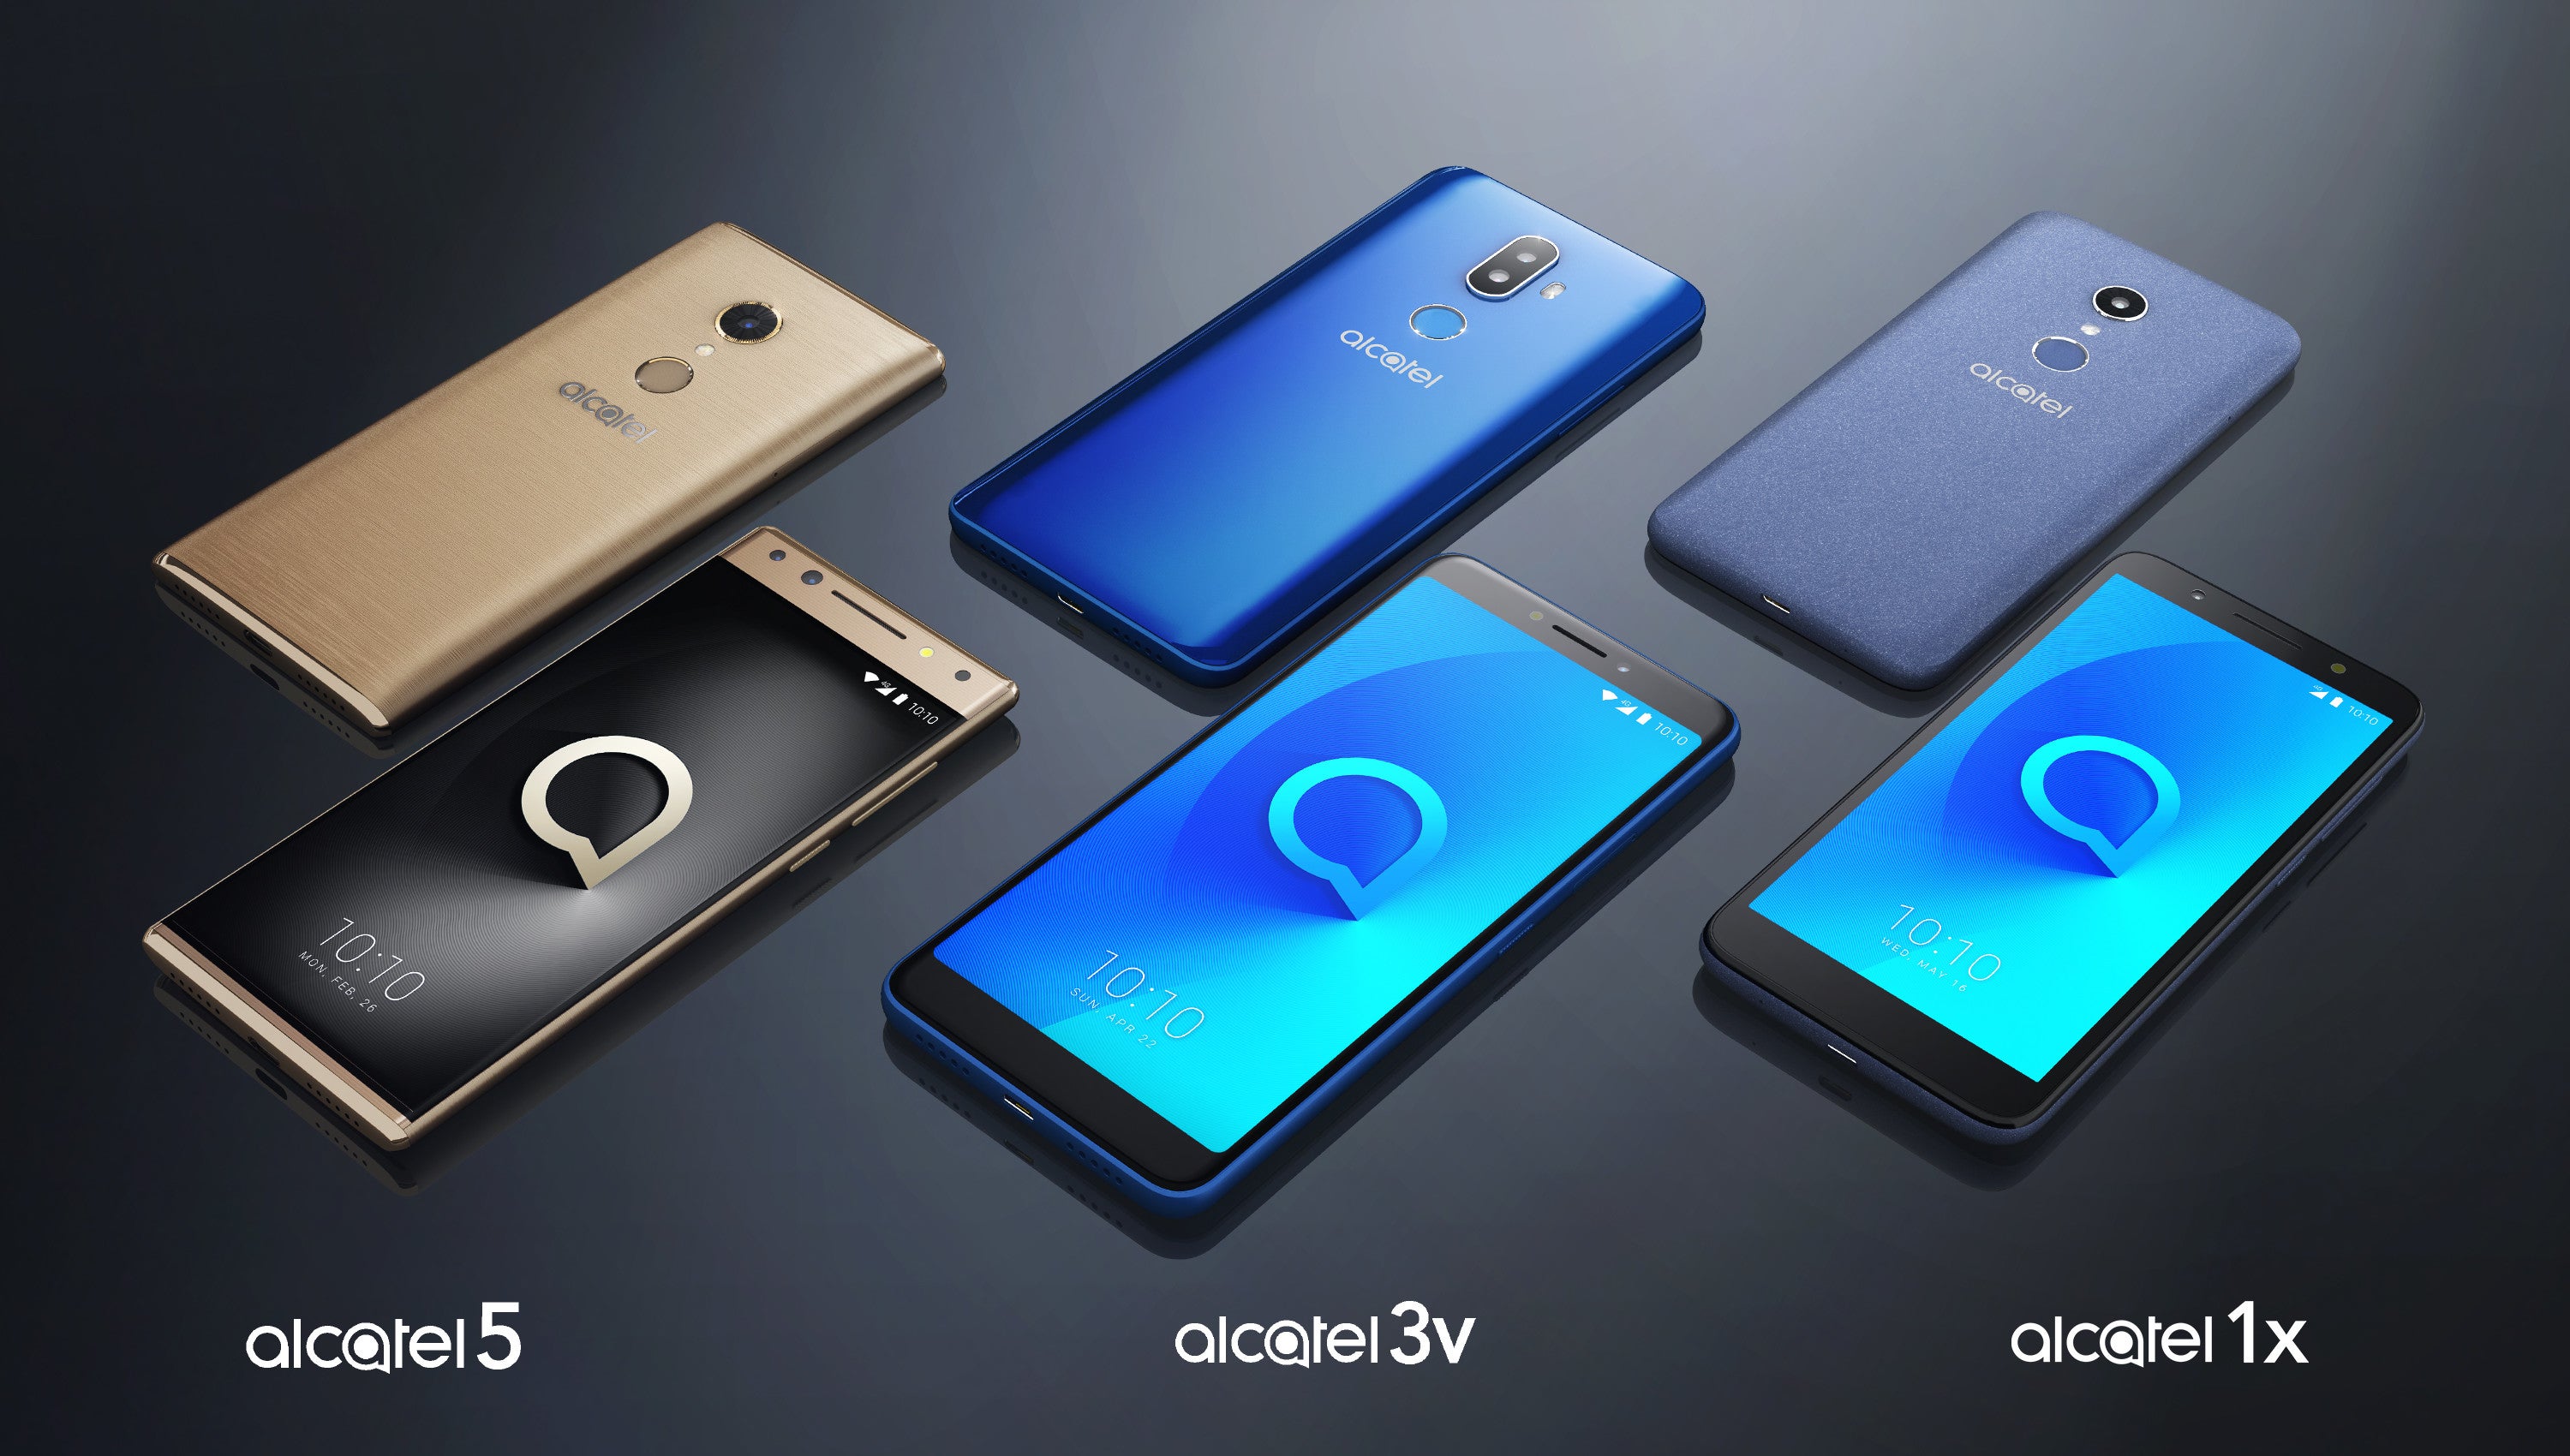 Alcatel reveals its 2018 smartphone lineup, promises immersive 18:9 display experience